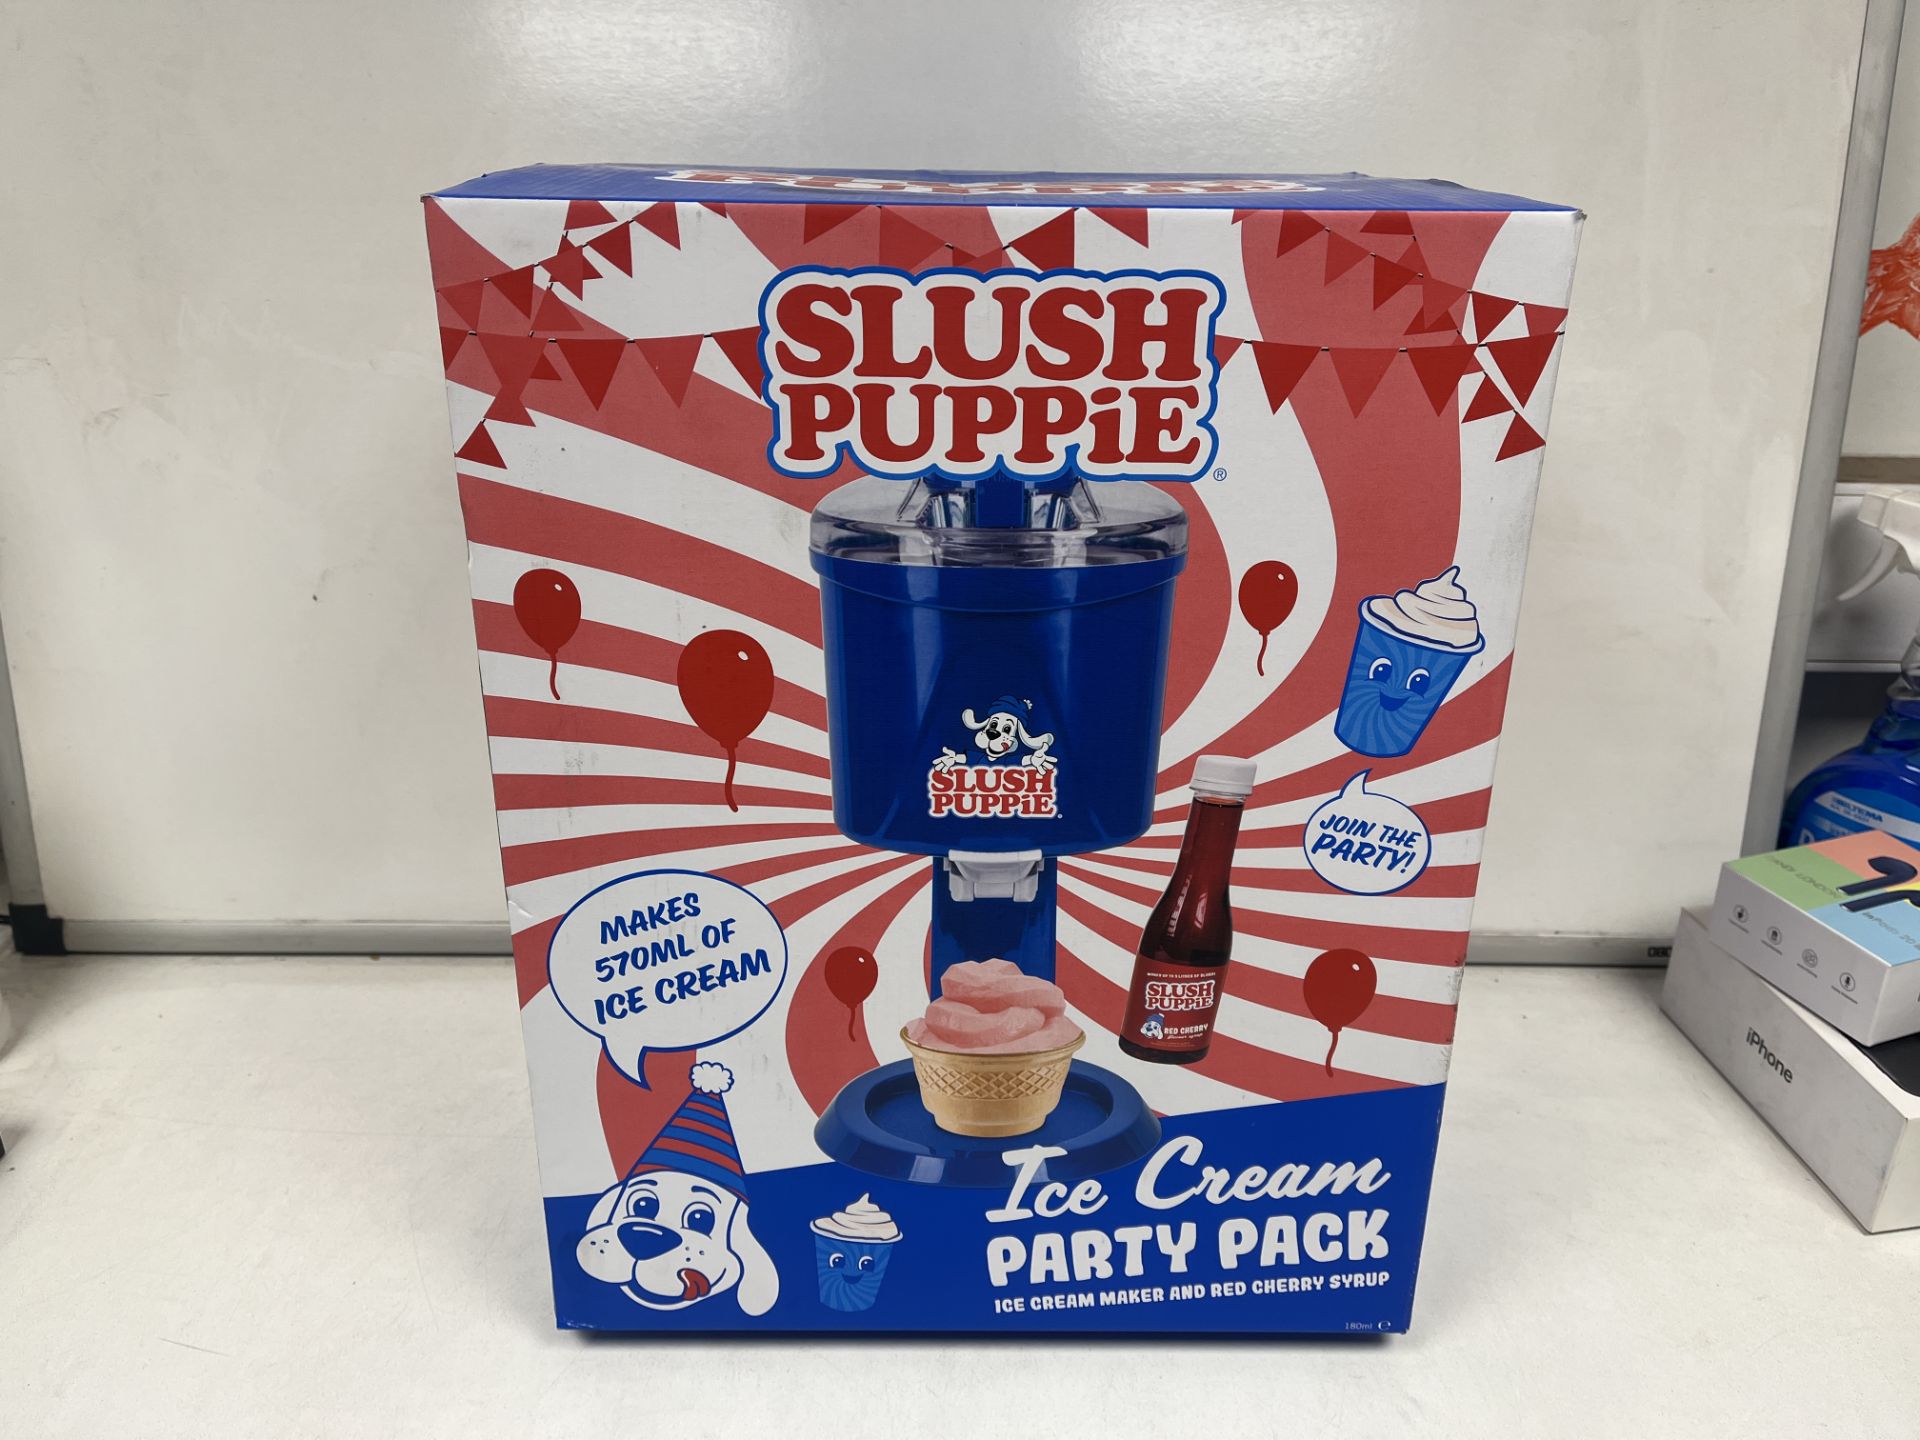 PALLET TO CONTAIN 24 X NEW BOXED SLUSH PUPPIE ICE CREAM PARTY PACK. ICE CREAM MAKER AND RED